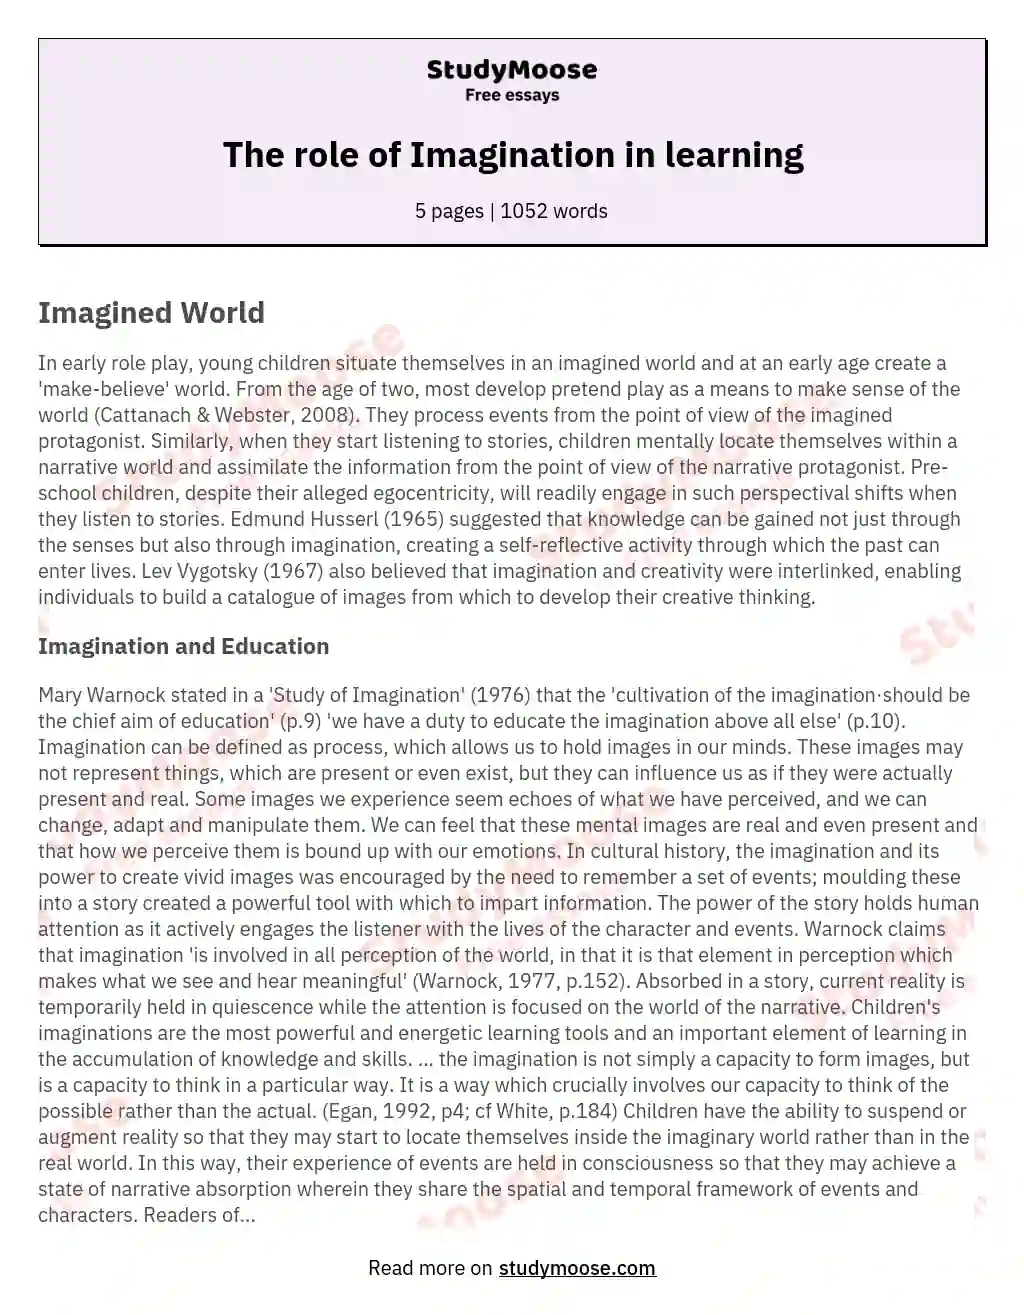 The role of Imagination in learning essay